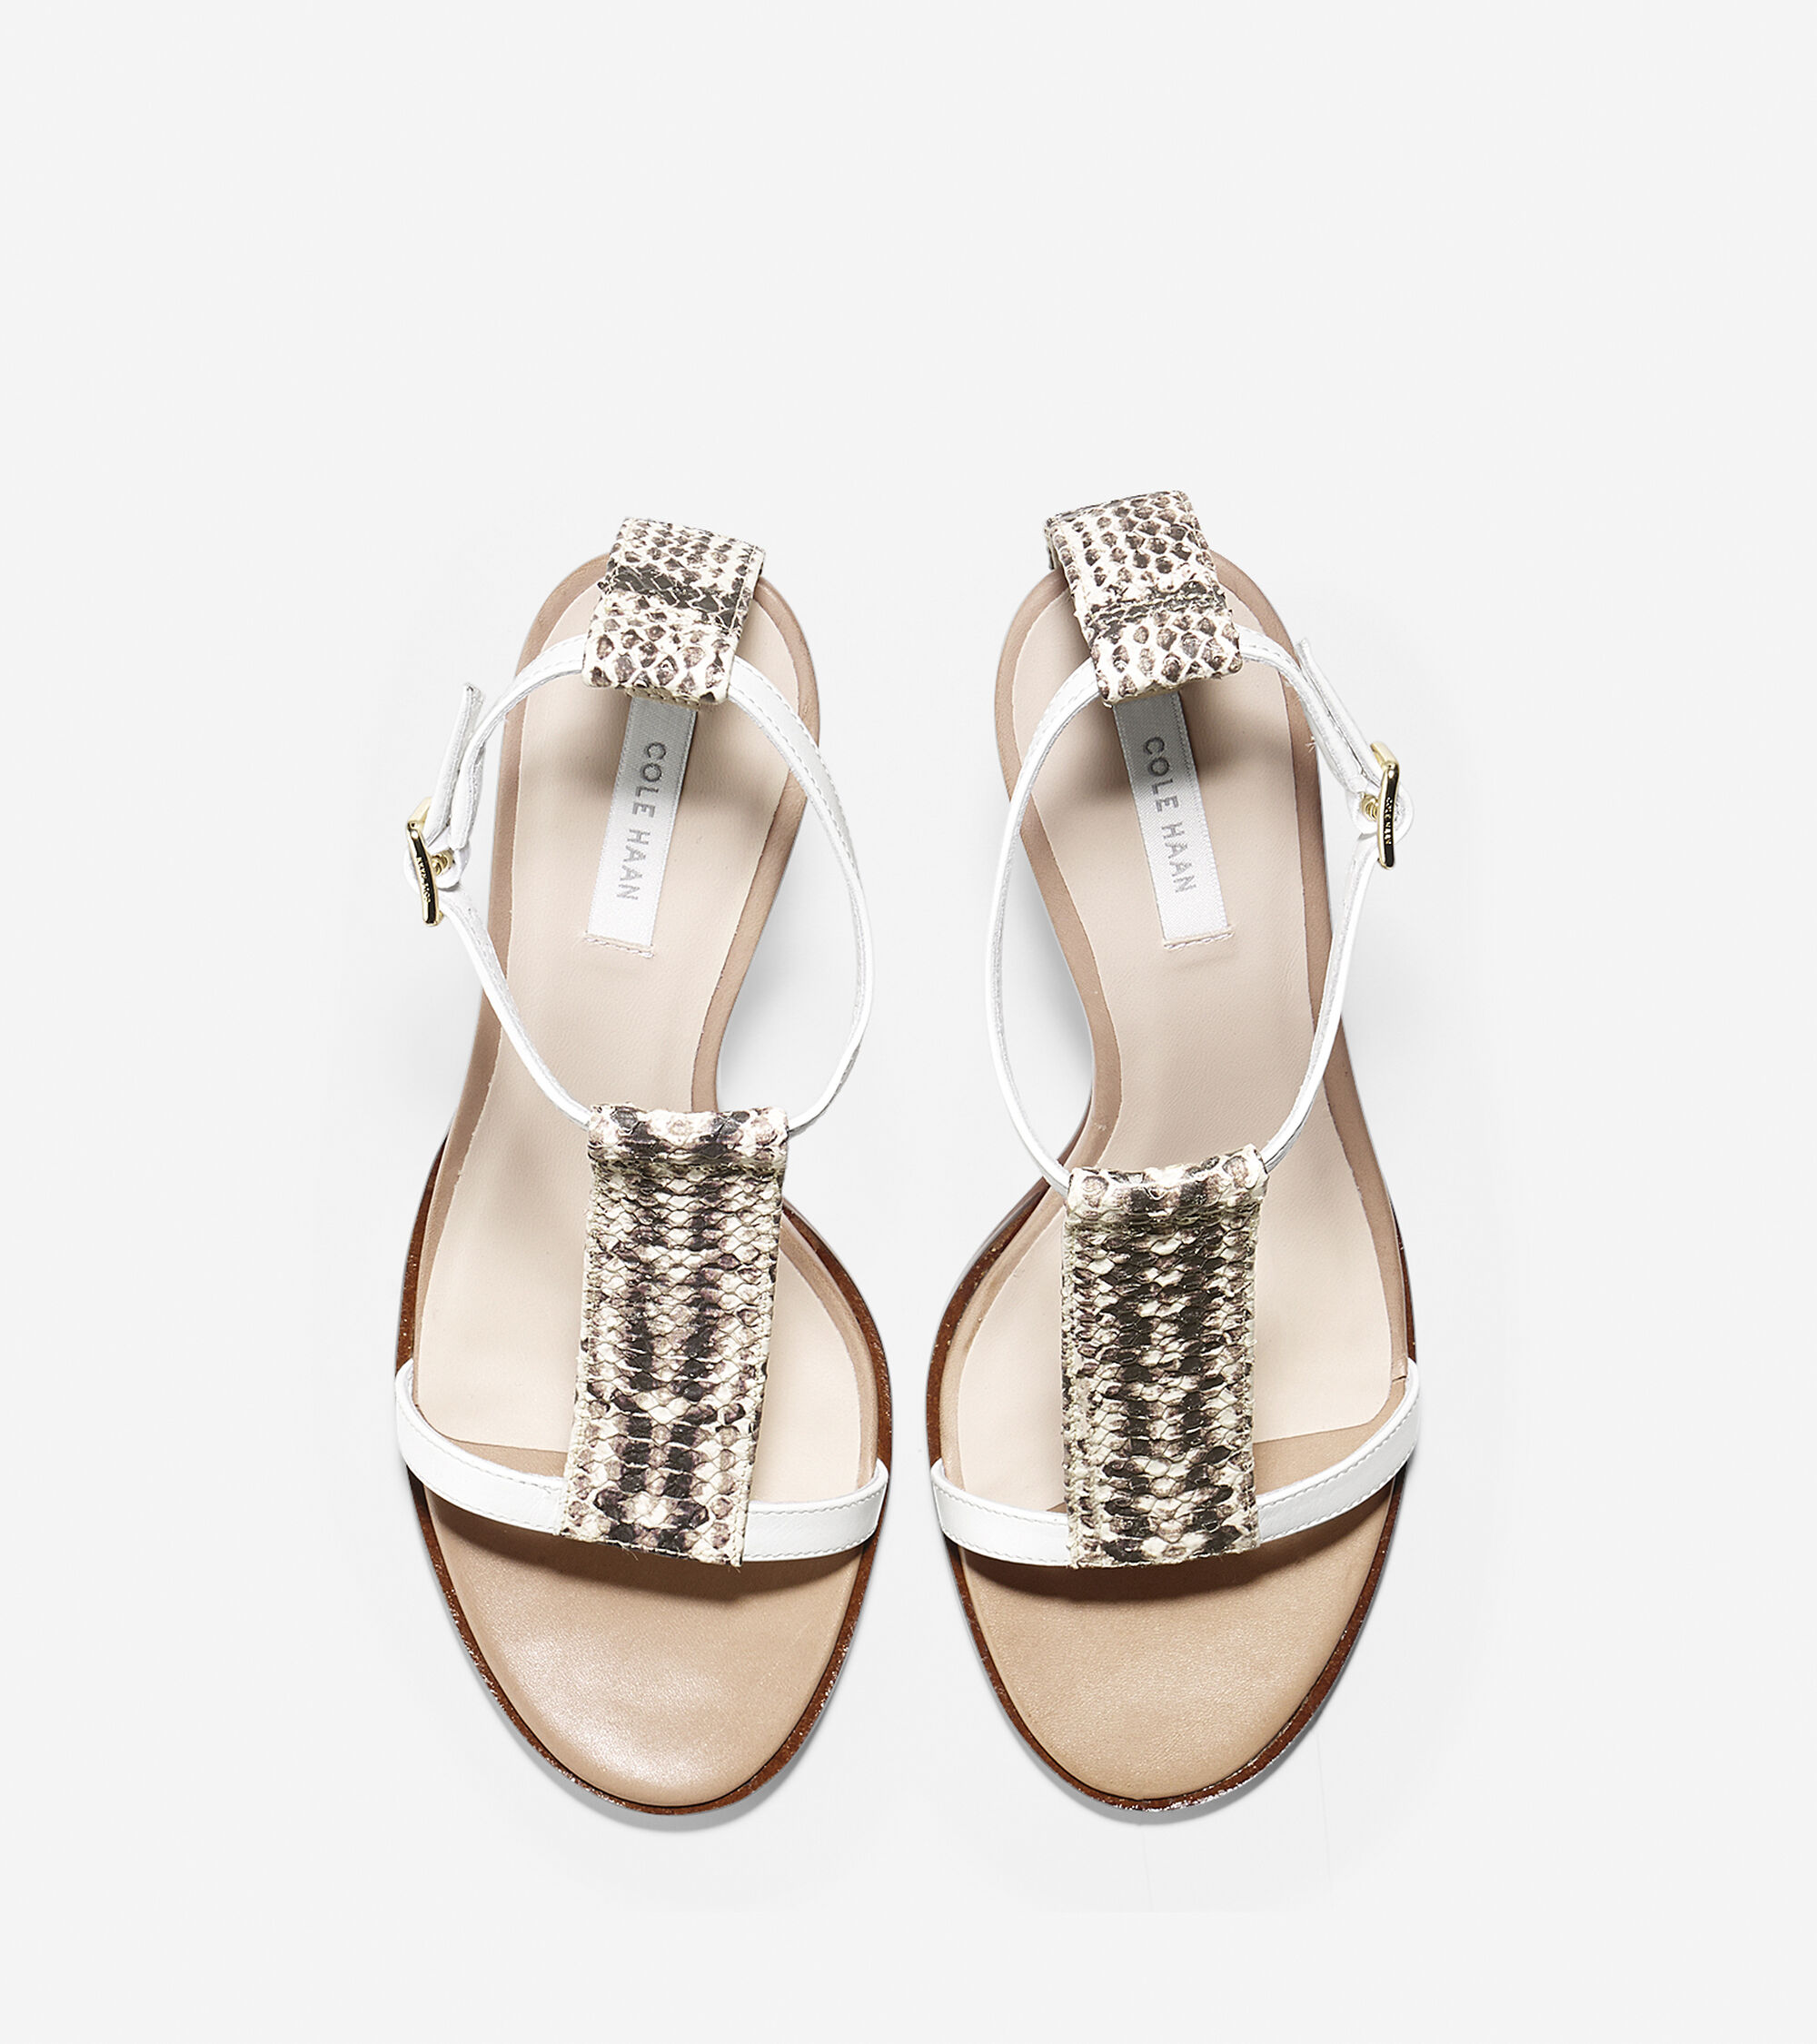 Cee Sandal (85mm) in Optic White-Snake Print | Cole Haan